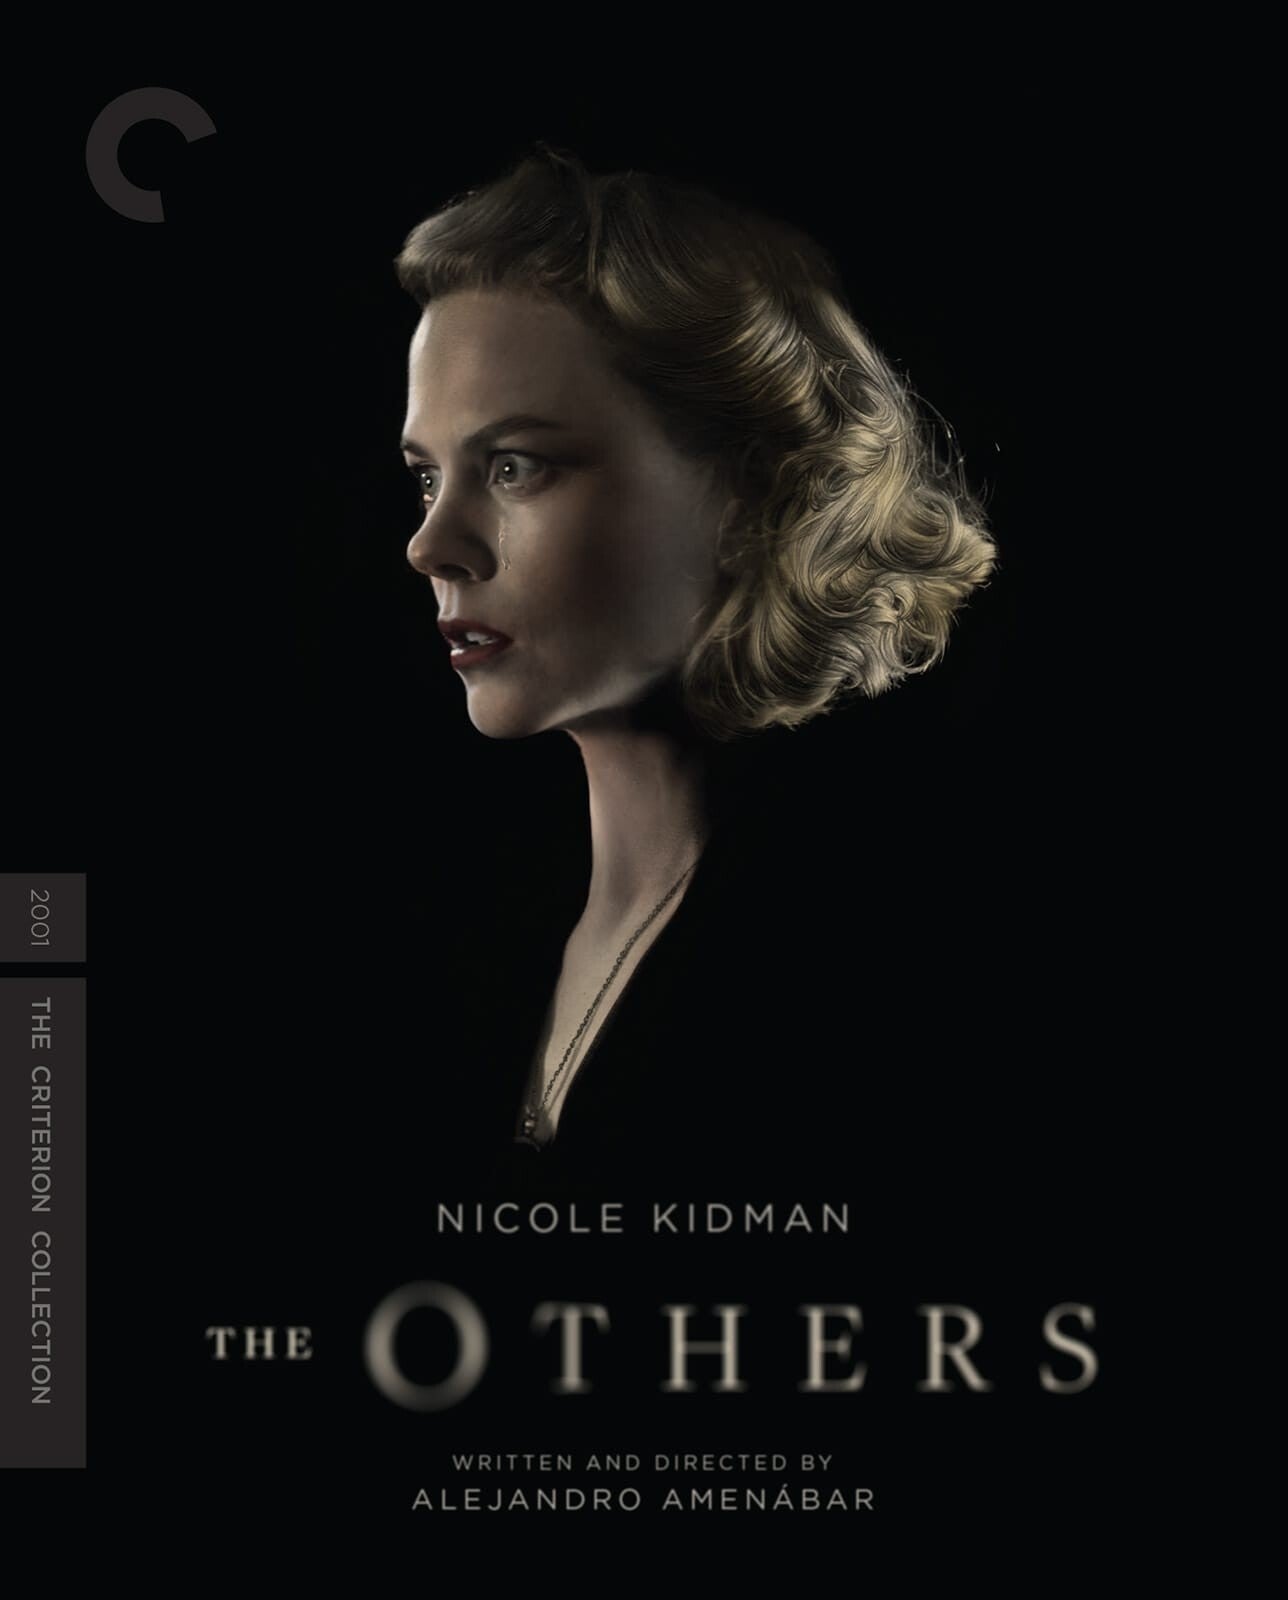 THE OTHERS 4K UHD/BLU-RAY